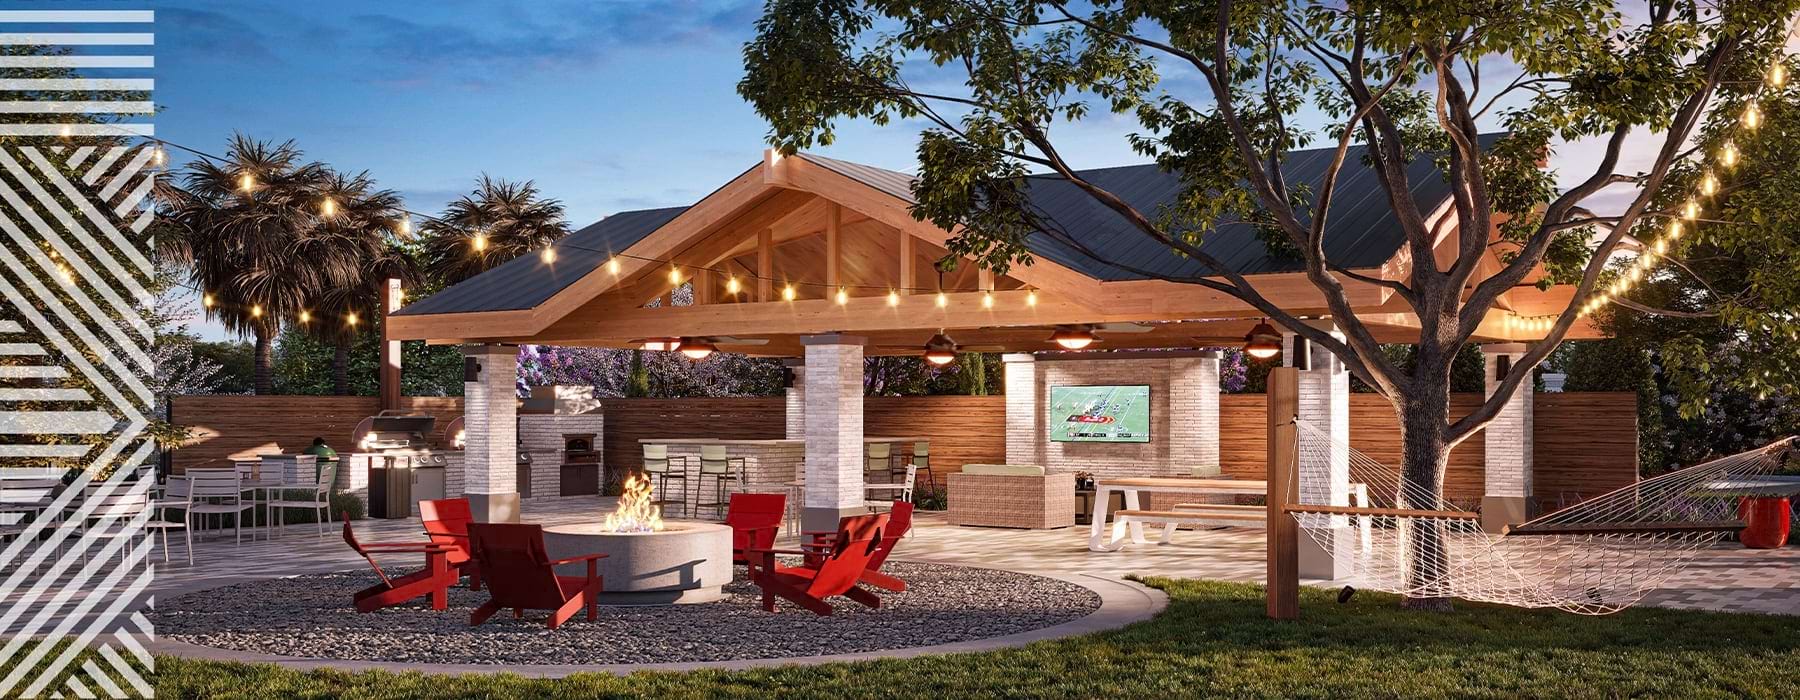 rendering of the event lawn showing hammocks, grill stations , a firepit and TV beside green turf